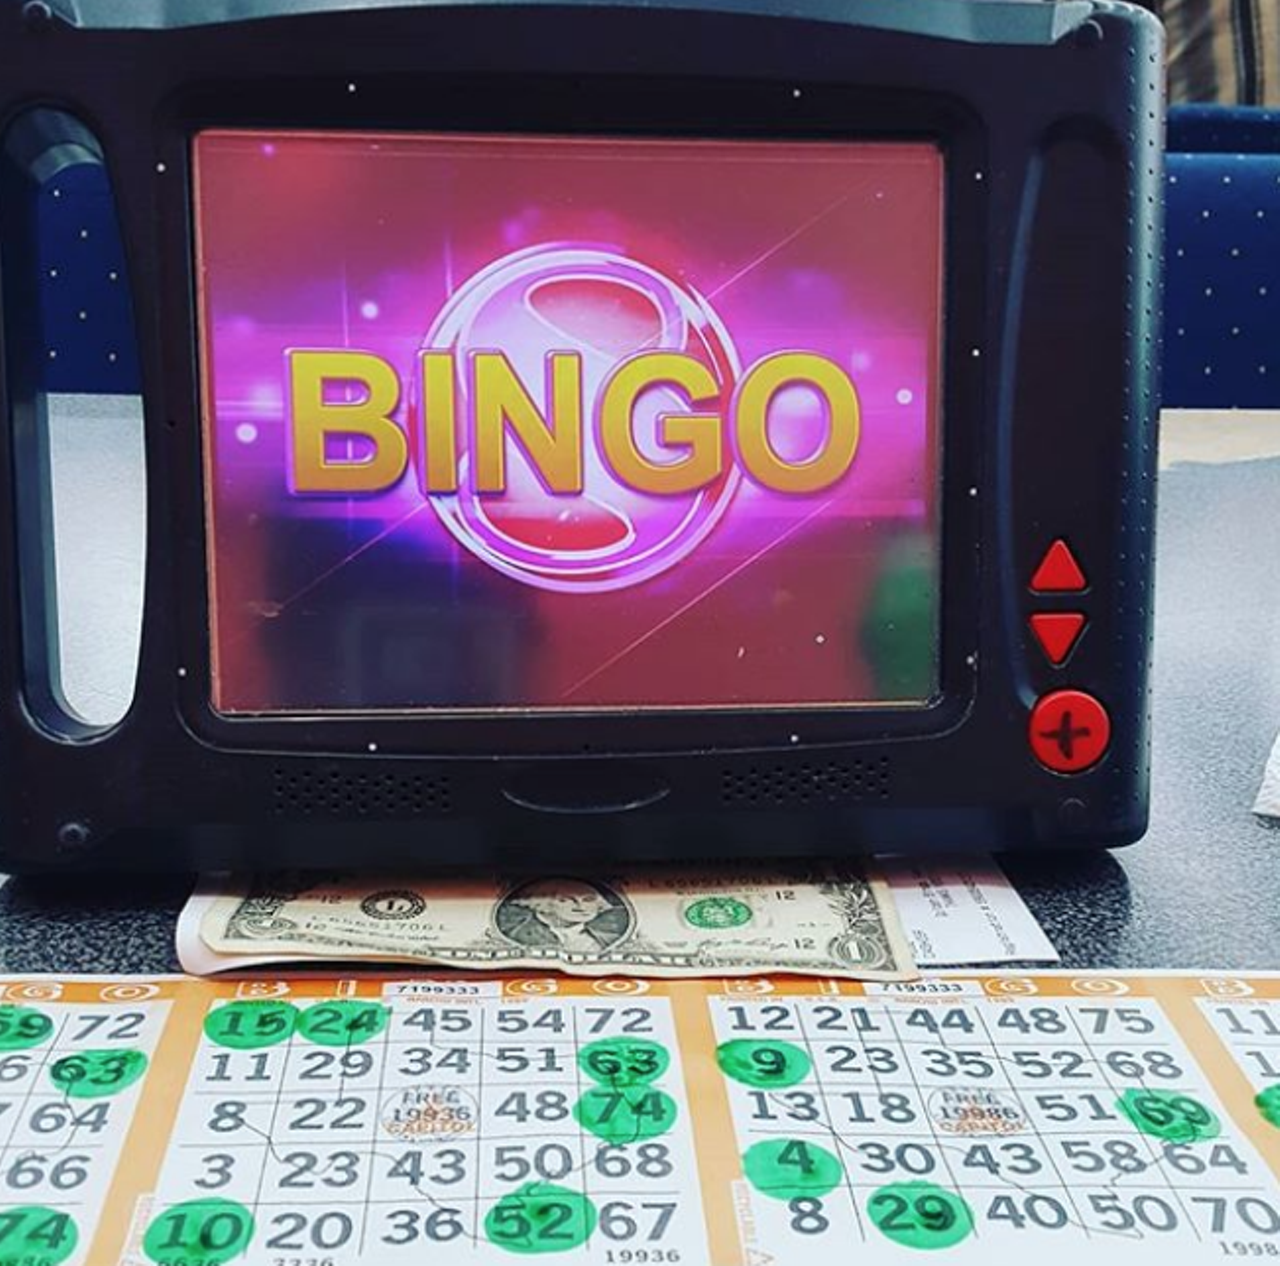 Try your luck at Bandera Late Night Bingo
5810 Bandera Road, (210) 682-6000, goldenbingofamily.com
Folks trying to win some cash or just looking for something laidback to do will want to play a few rounds at late-night bingo. This bingo hall stays open to the wee hours so you can sit back and get your snack on while you try to win big. May the odds be in your favor.
Photo via Instagram / mvaldez148